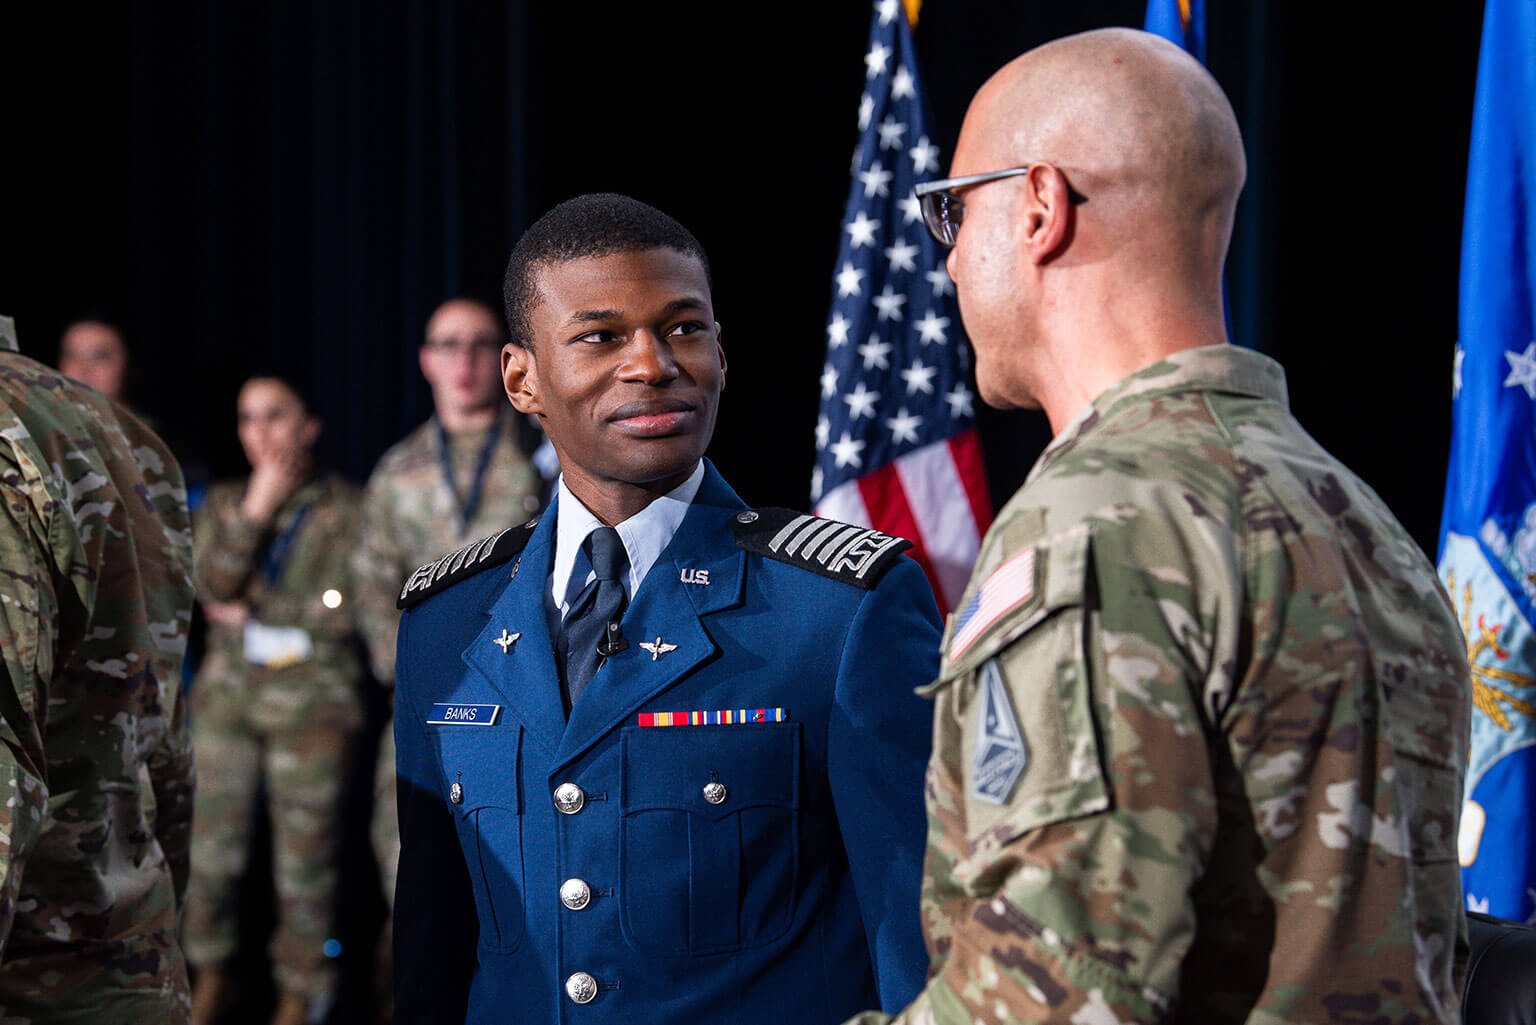 U.S. Air Force Academy Cadet 1st Class Ruben Banks speaks with Chief Master Sgt. Of the Space Force John Bentivegna.